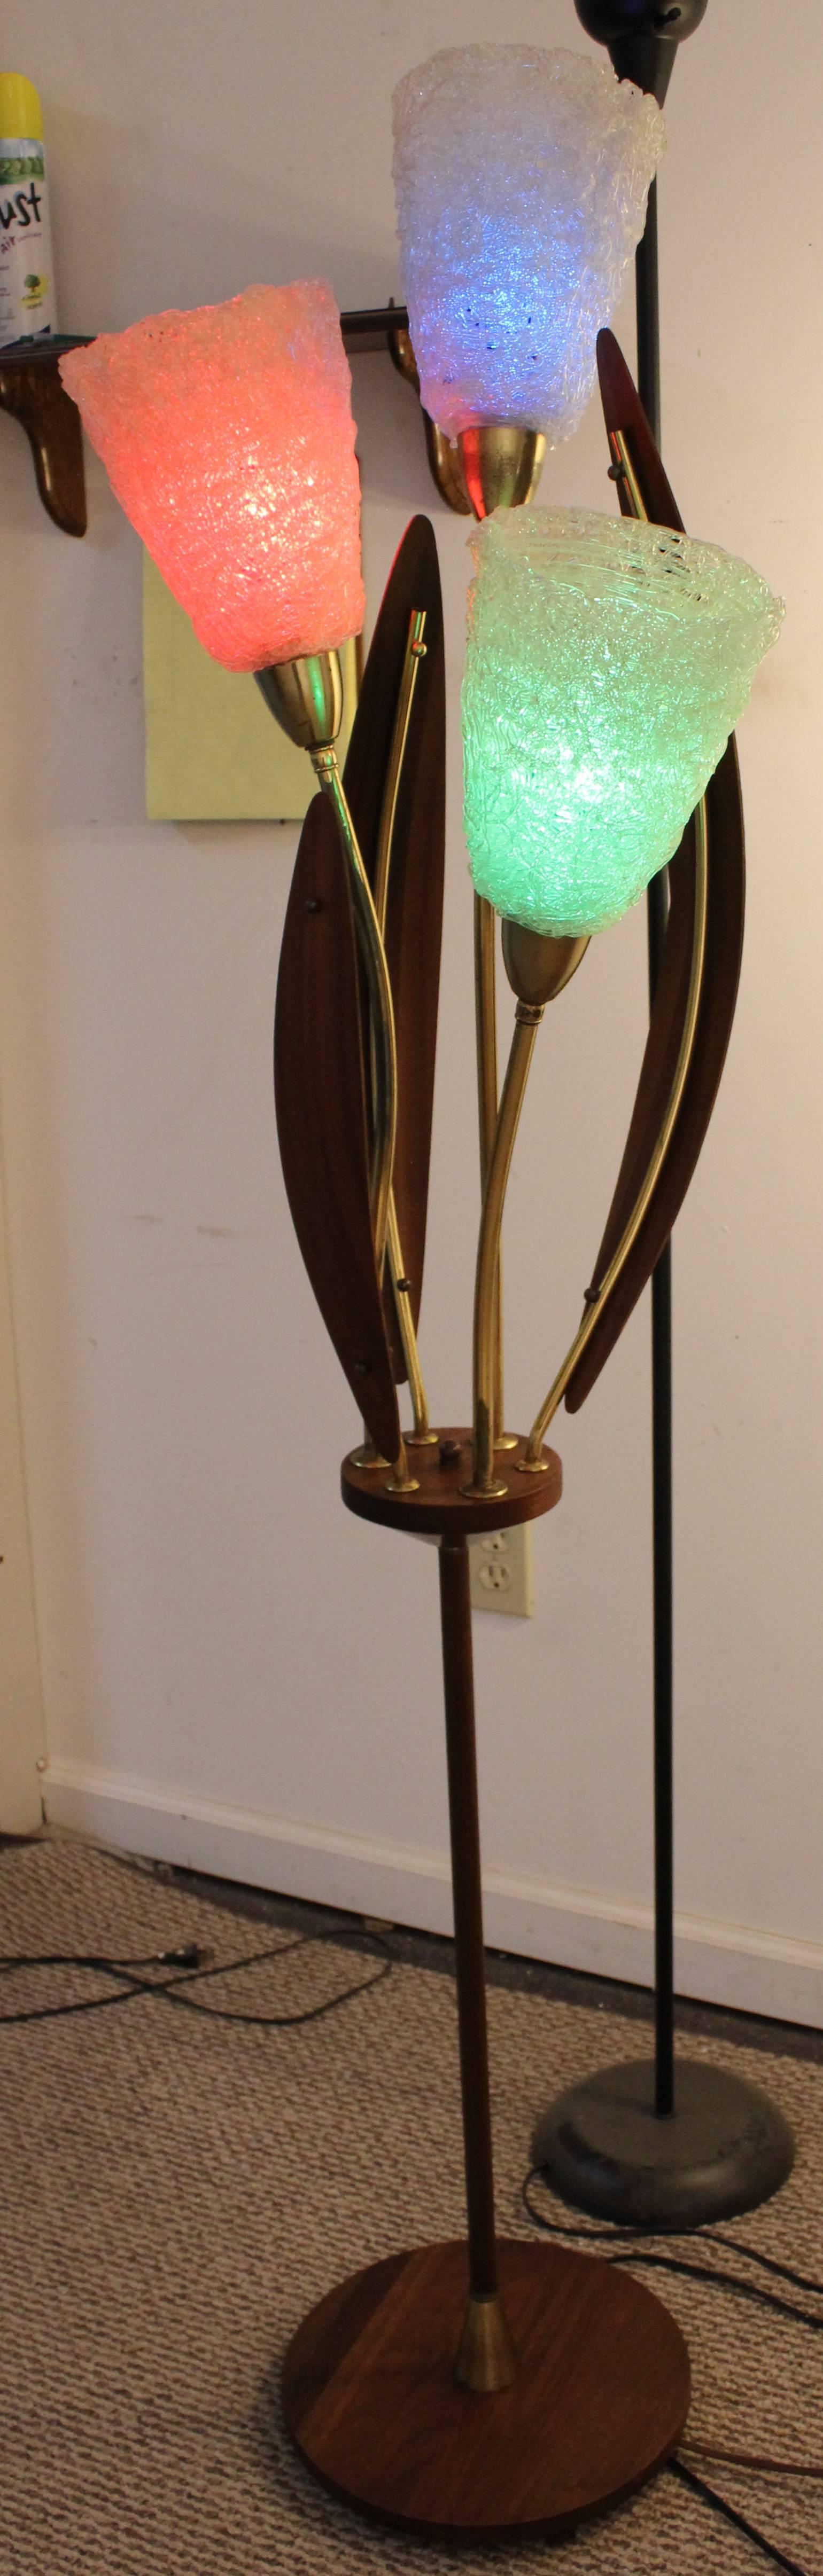 This is a three-way lamp with fiberglass shades and walnut leaves to make the form of a flower. In the pictures, we used colored light bulbs (not included).

Dimensions:
12.5